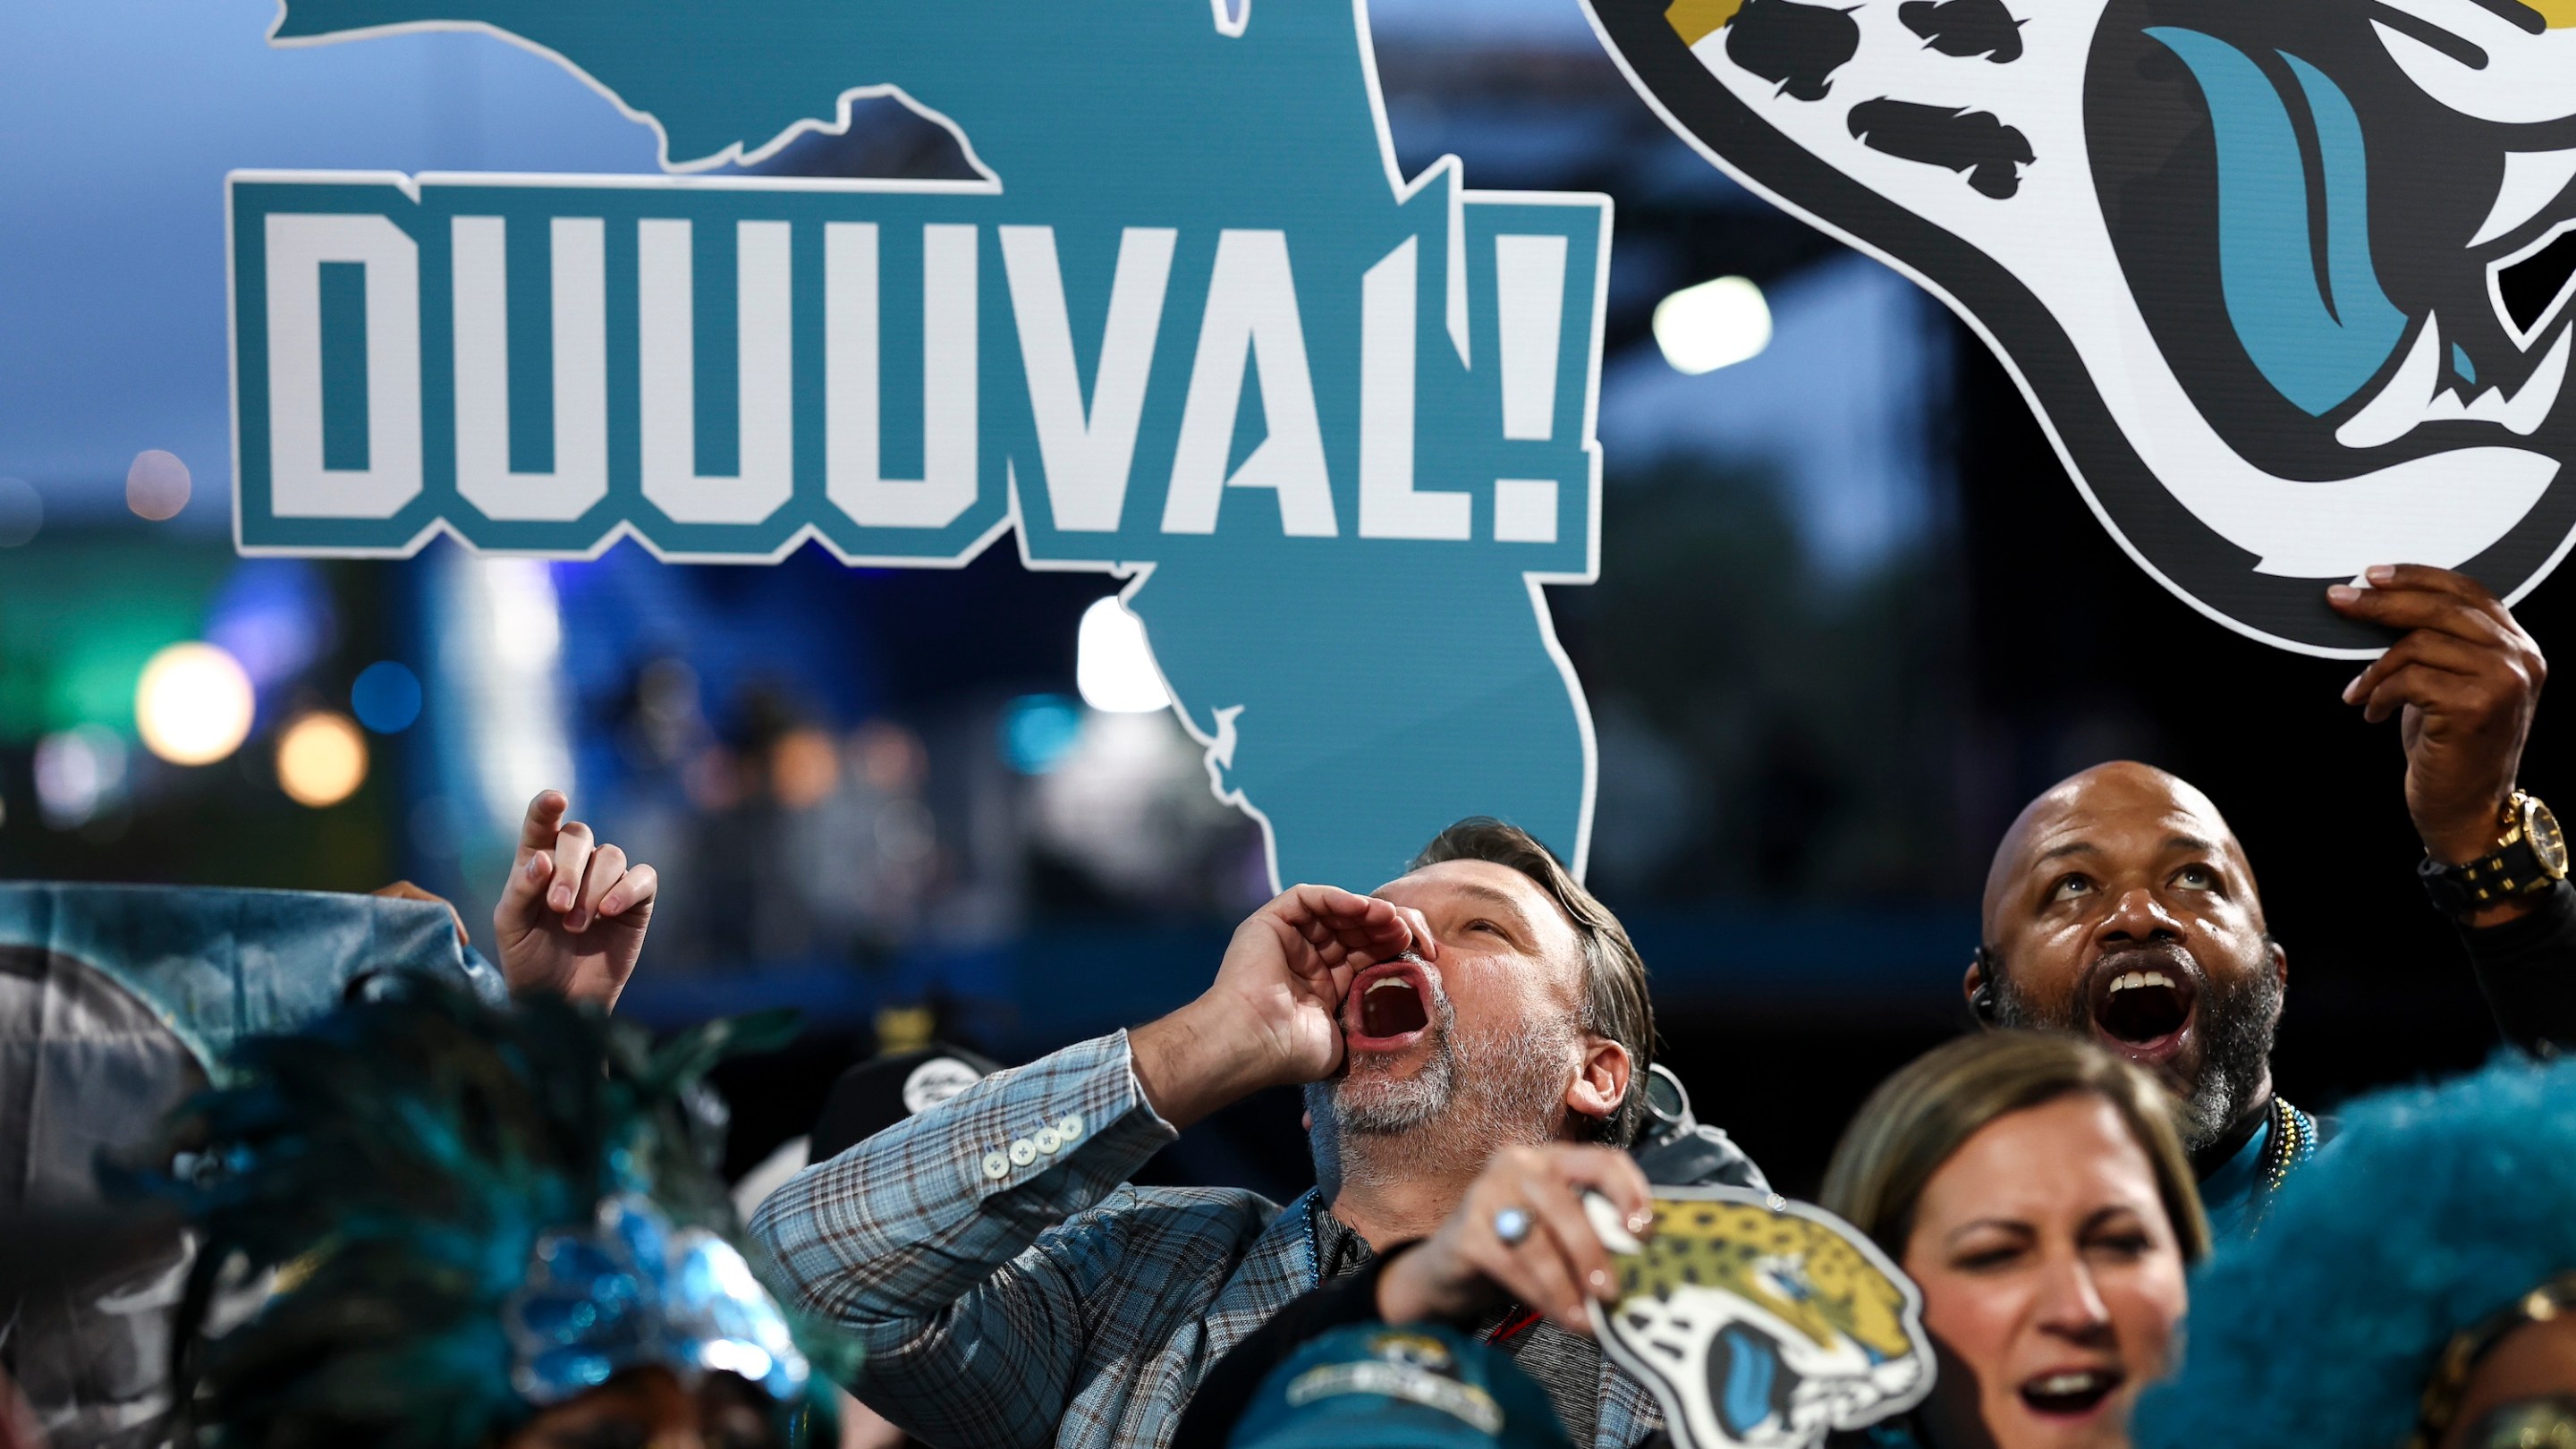 KANSAS CITY, MO - APRIL 28: Jacksonville Jaguars fans cheer during Day 2 of the 2023 NFL Draft at Union Station on April 28, 2023 in Kansas City, Missouri. (Photo by Kevin Sabitus/Getty Images)